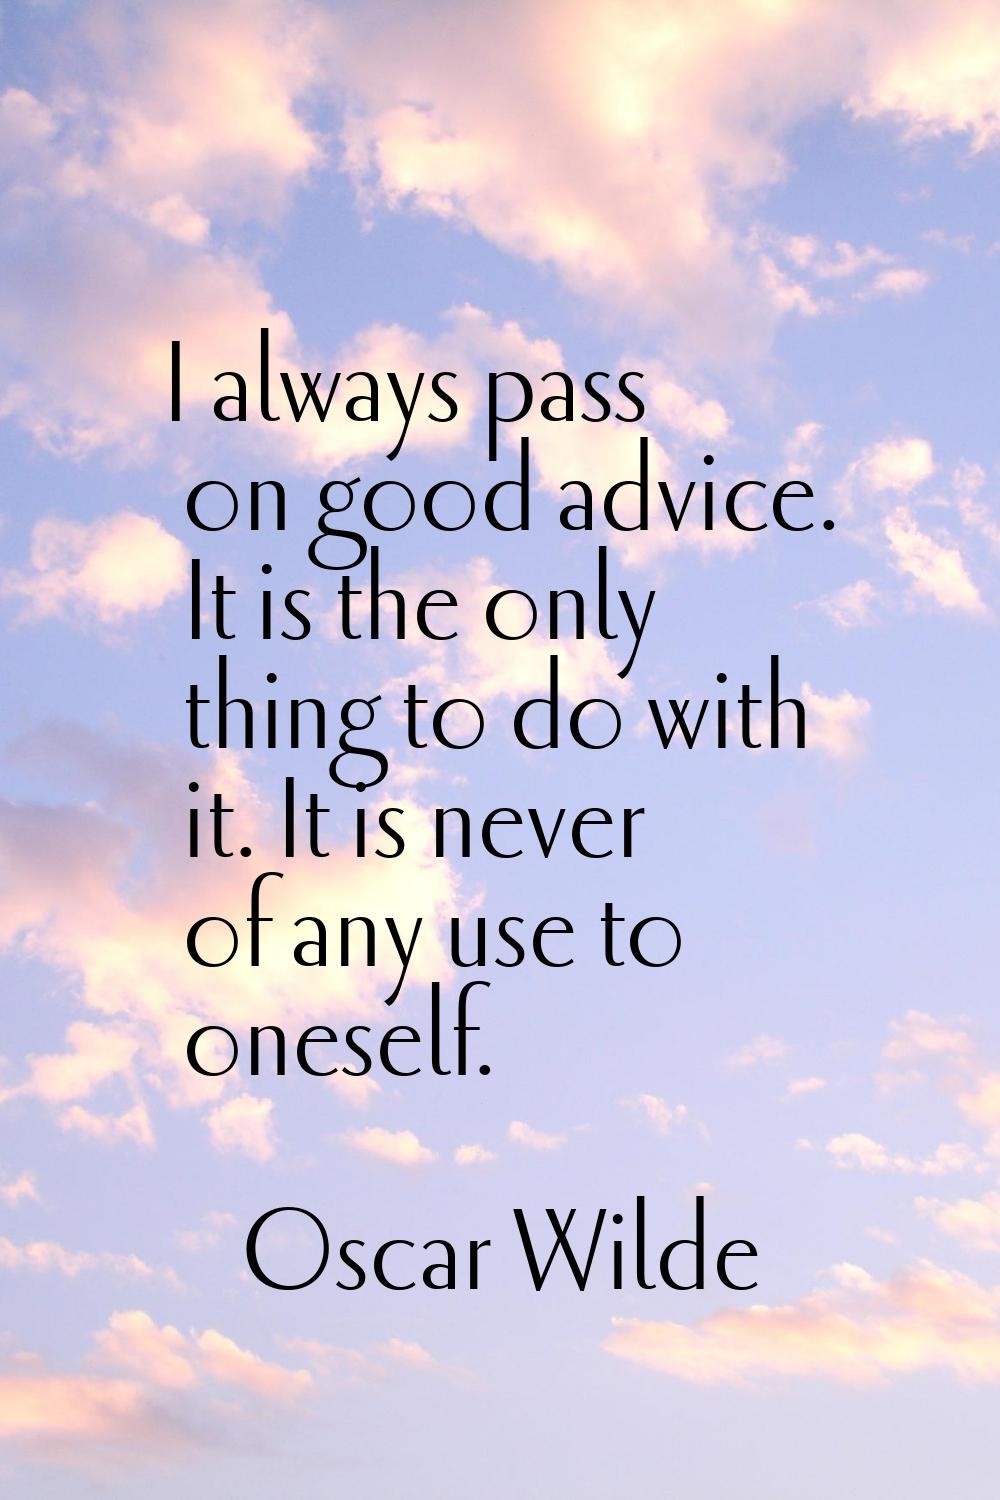 I always pass on good advice. It is the only thing to do with it. It is never of any use to oneself